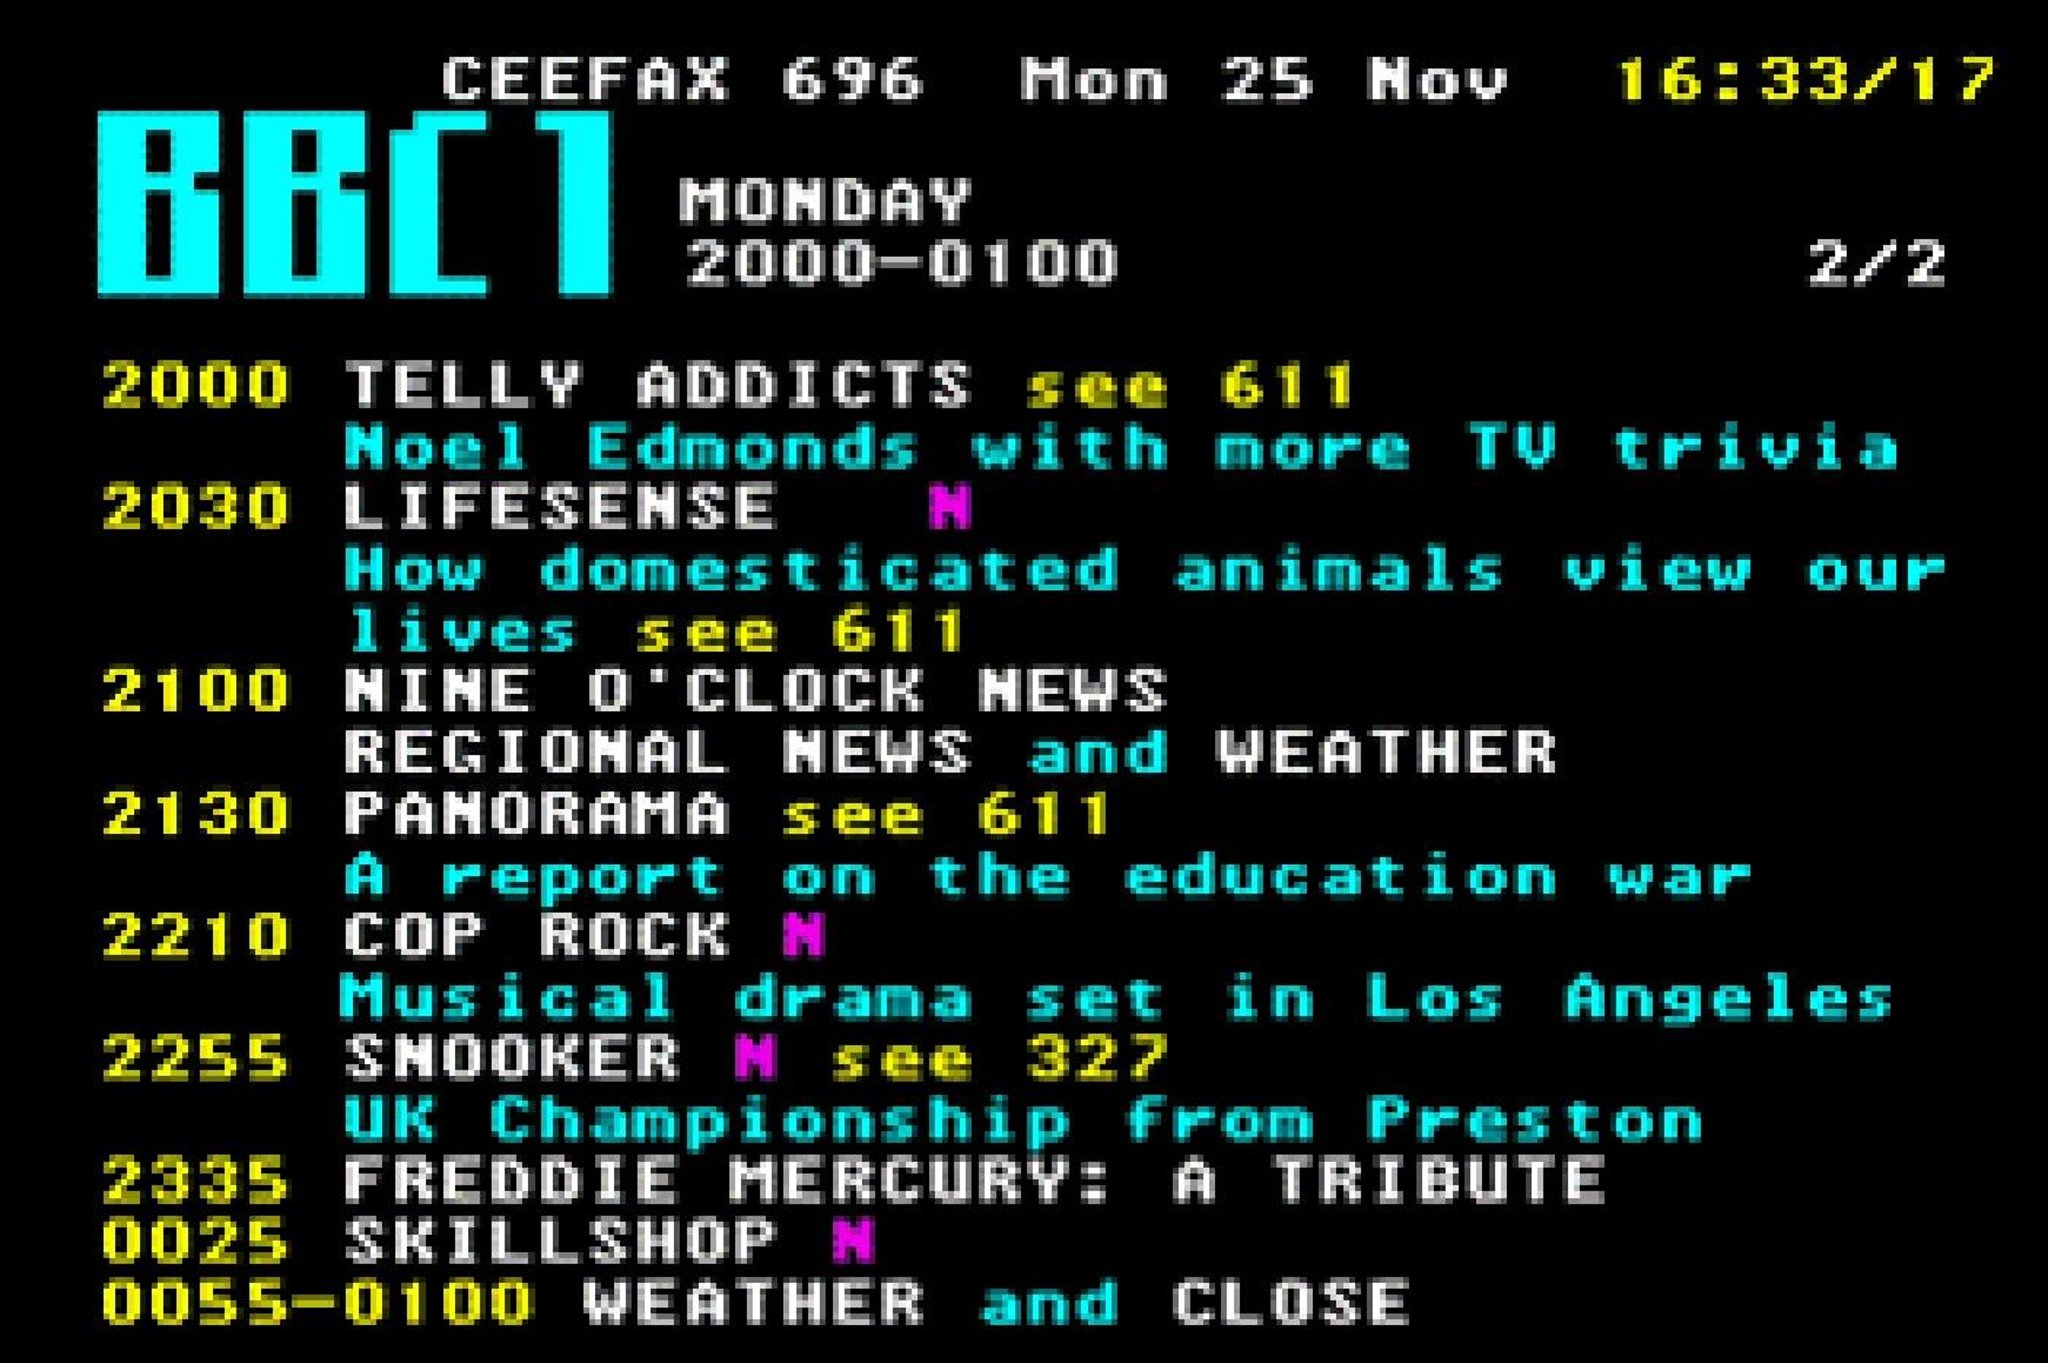 Blast from the past: Ceefax